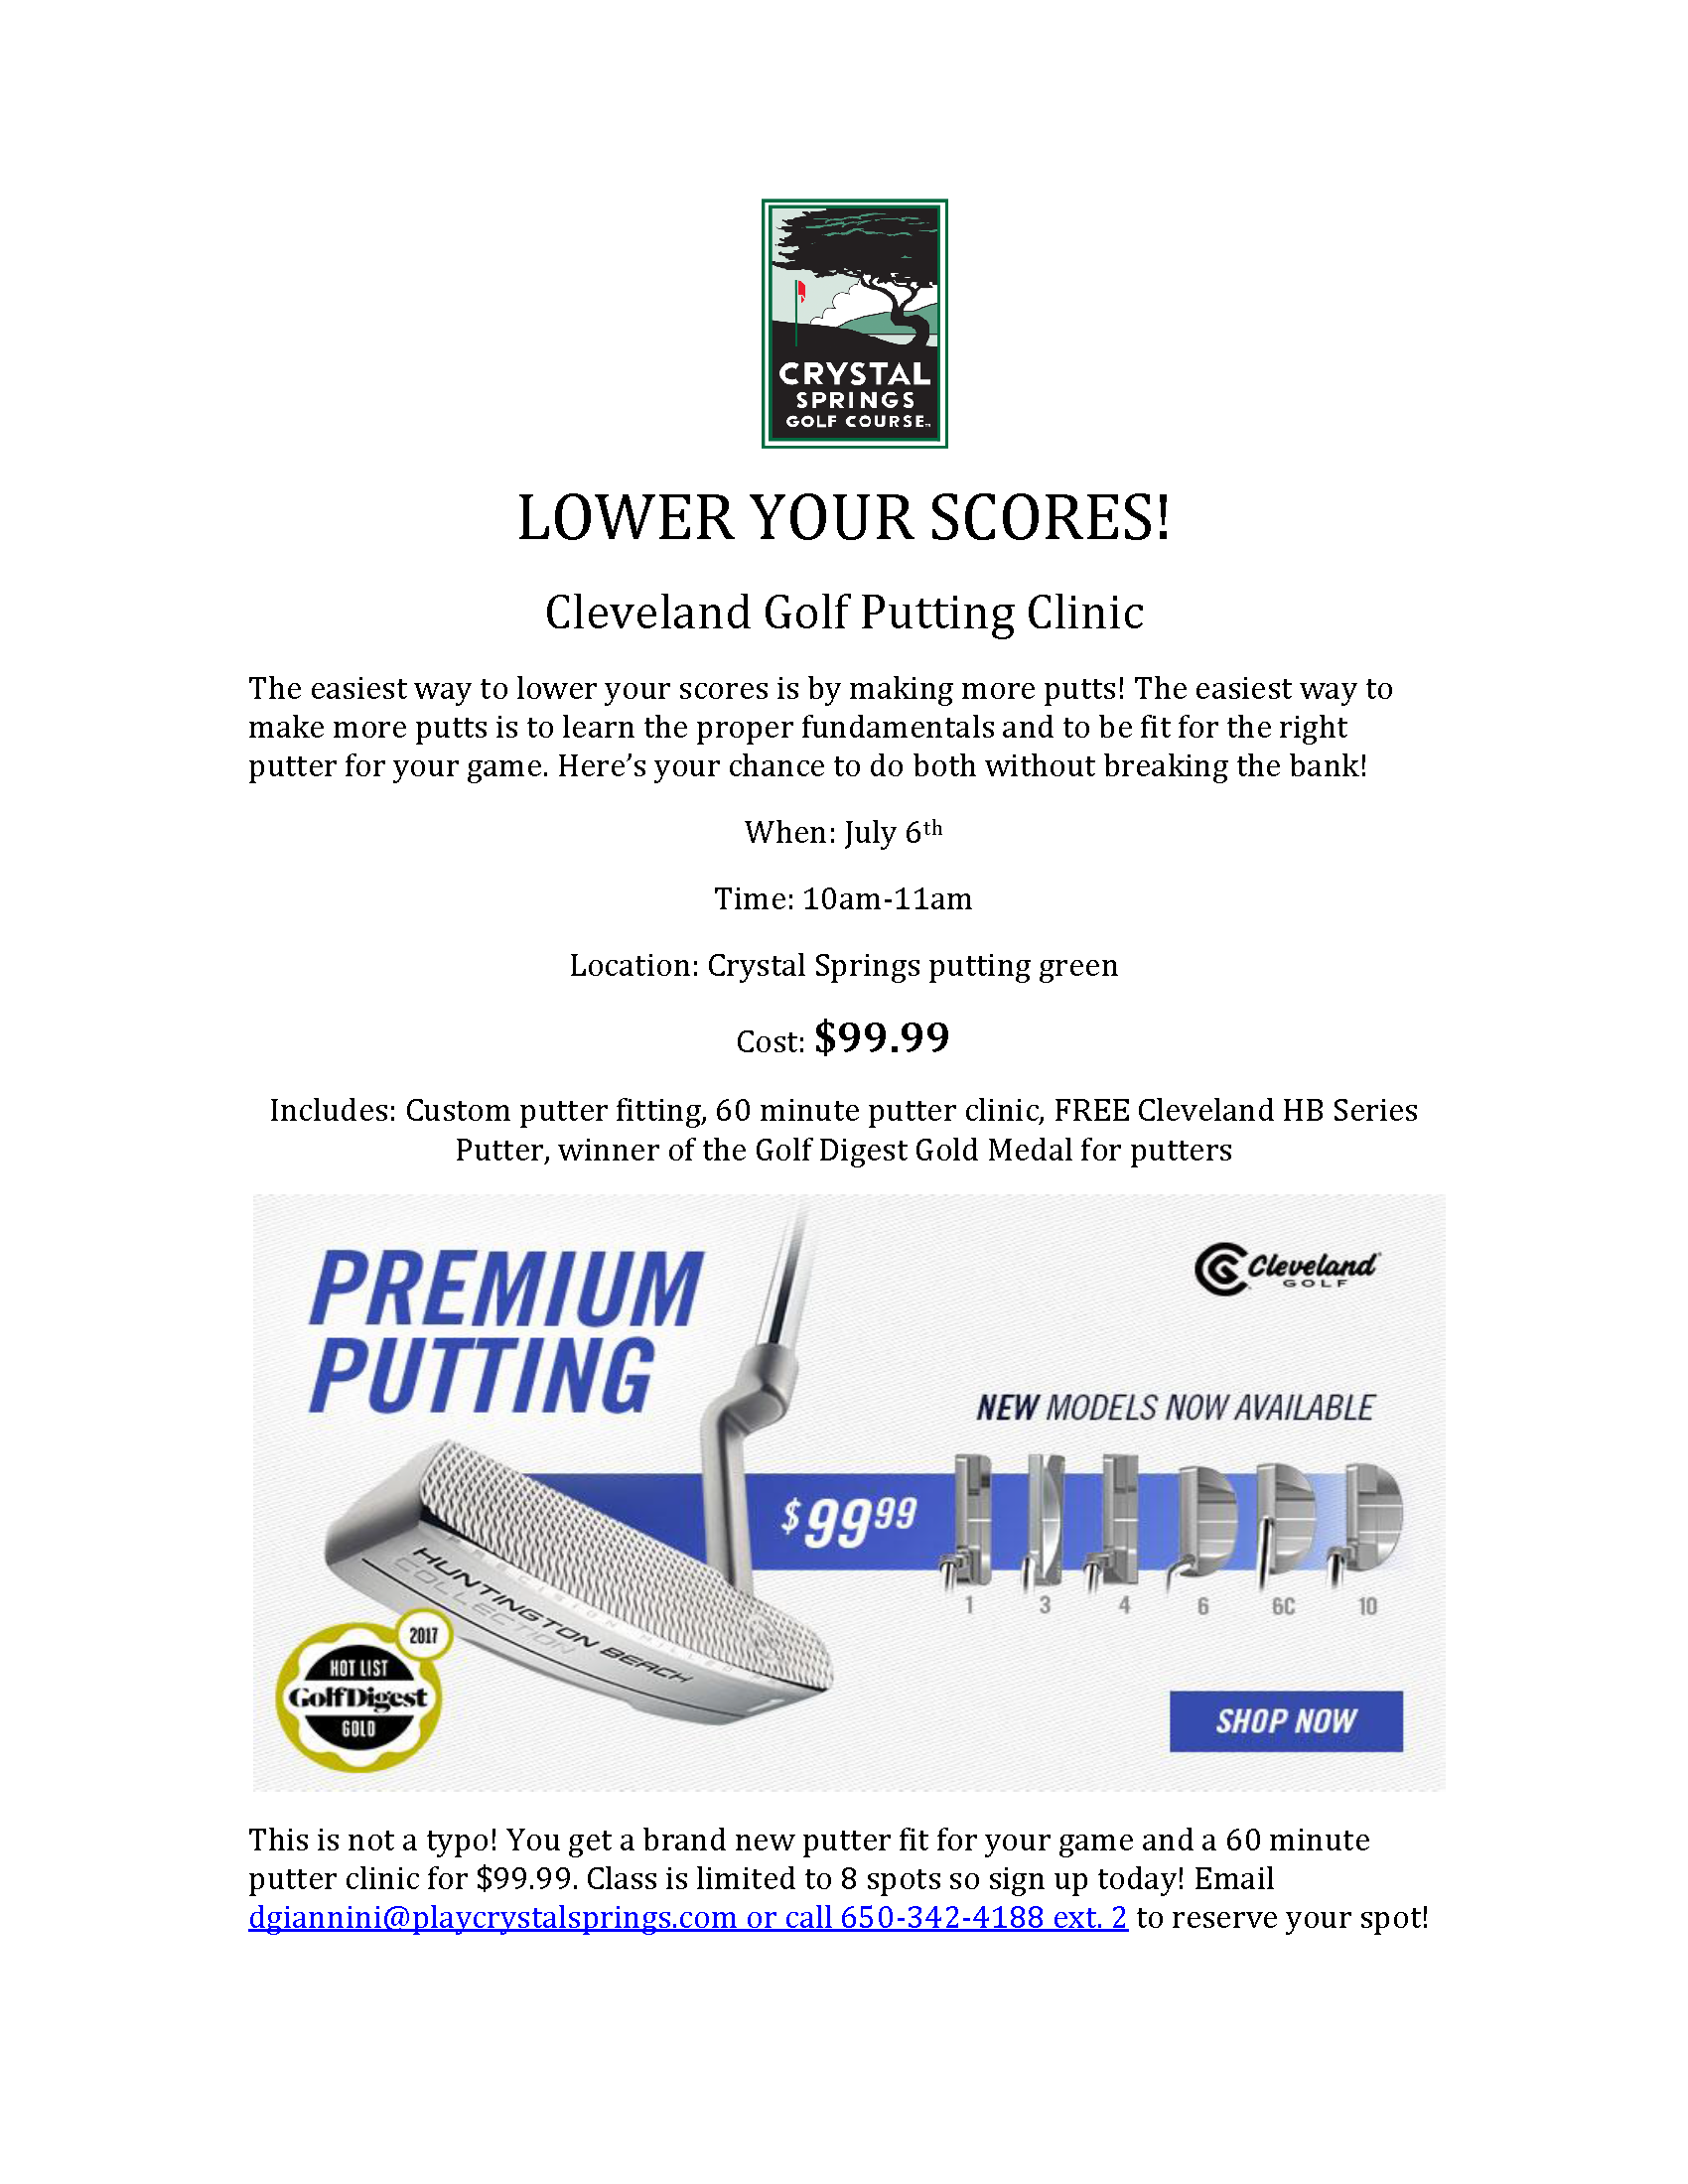 Putter Clinic Email cleveland